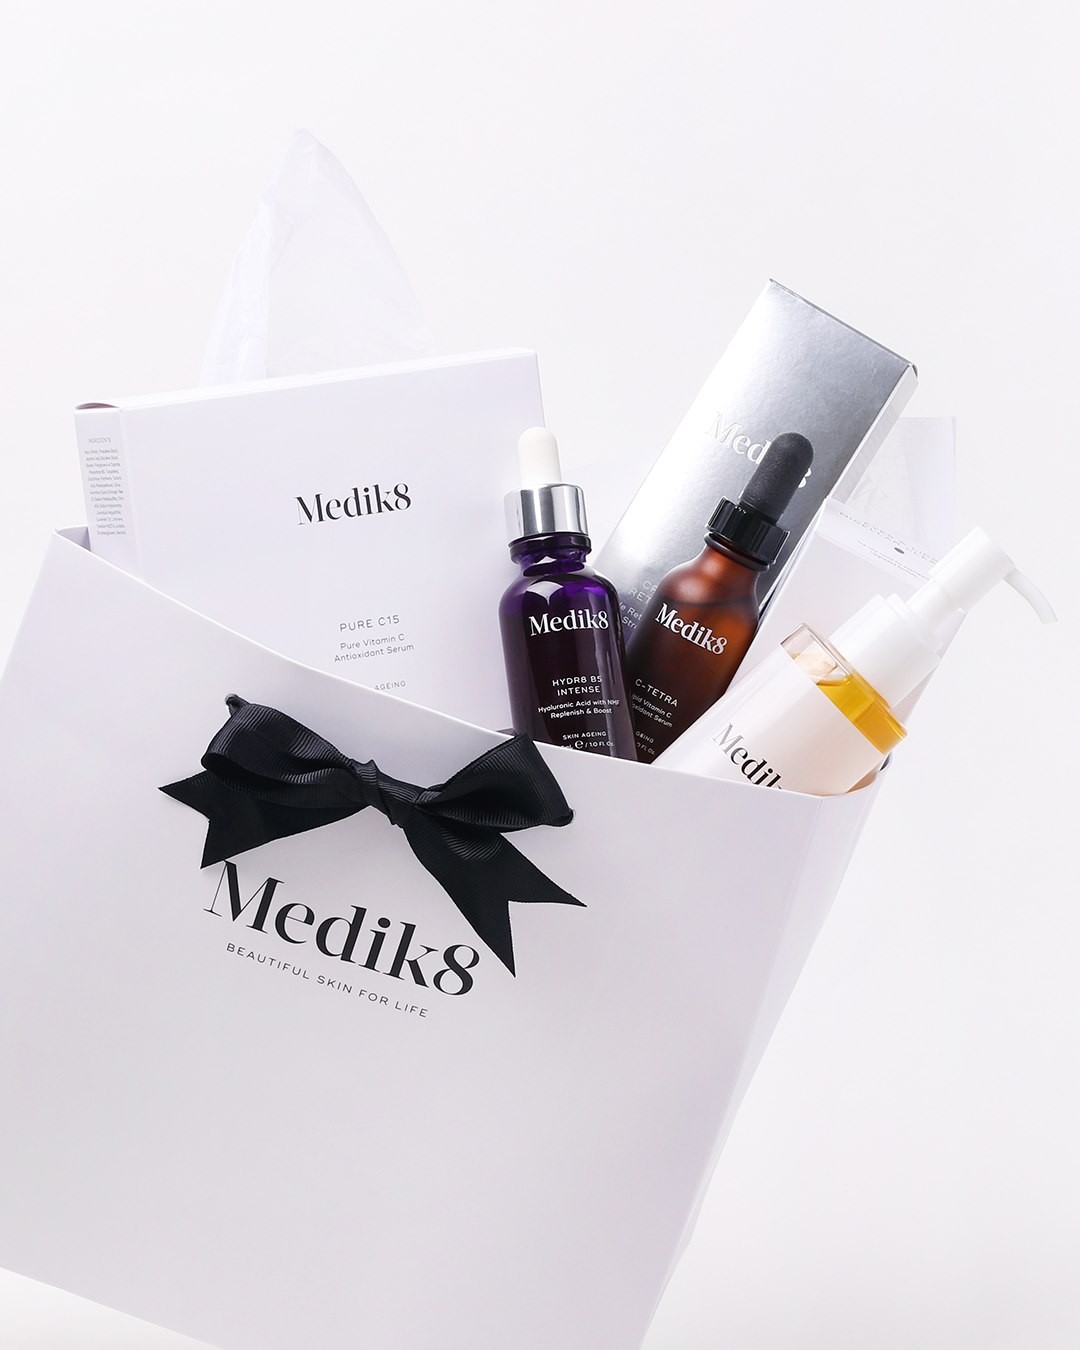 Calling all our authorised Medik8 professional clinics and salons to take part i...